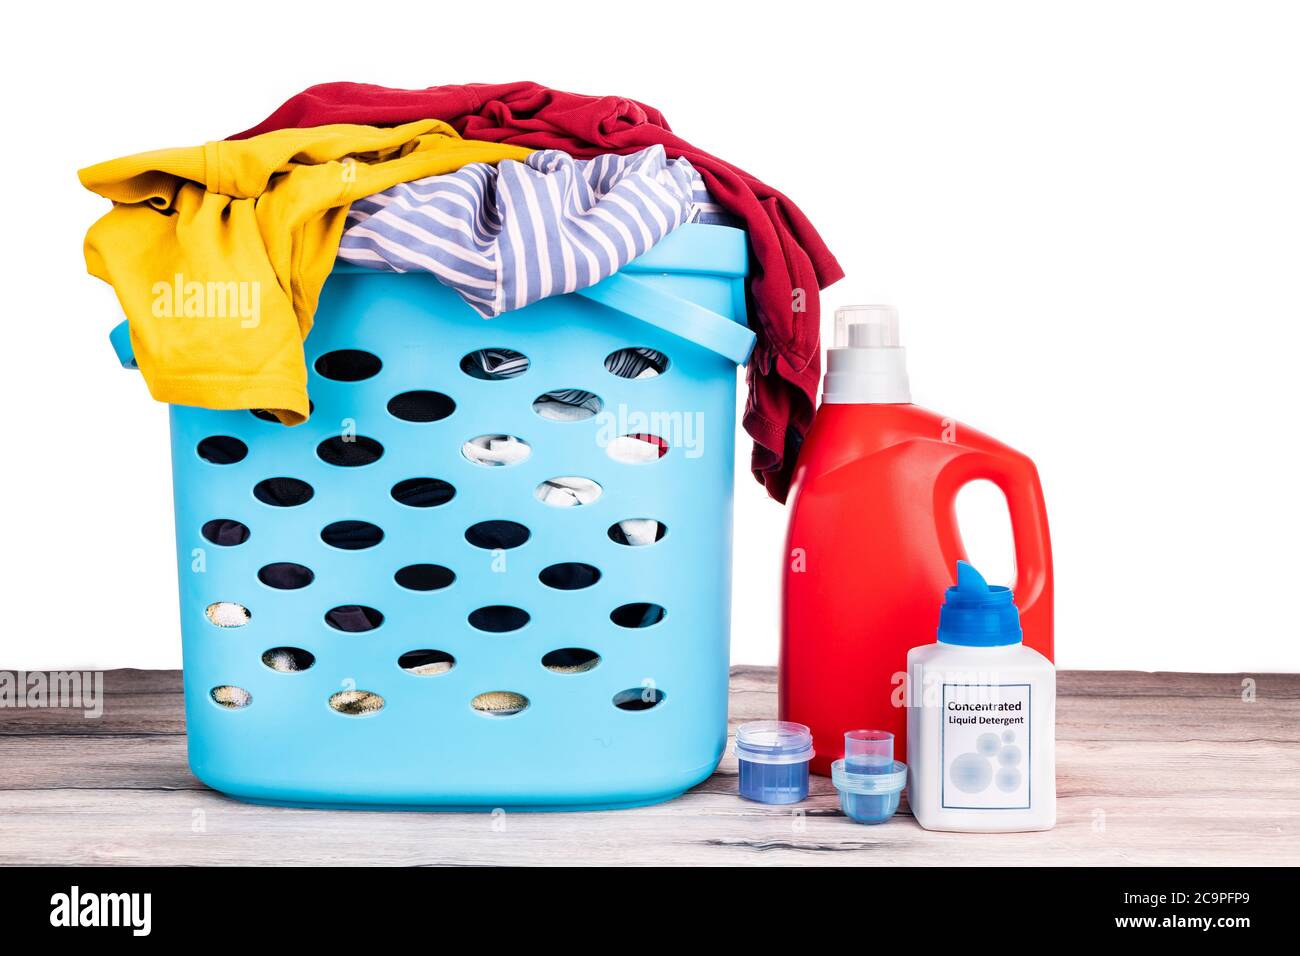 Compact concentrated laundry liquid detergent and regular liquid detergent next to basket full of apparels against white backgound Stock Photo